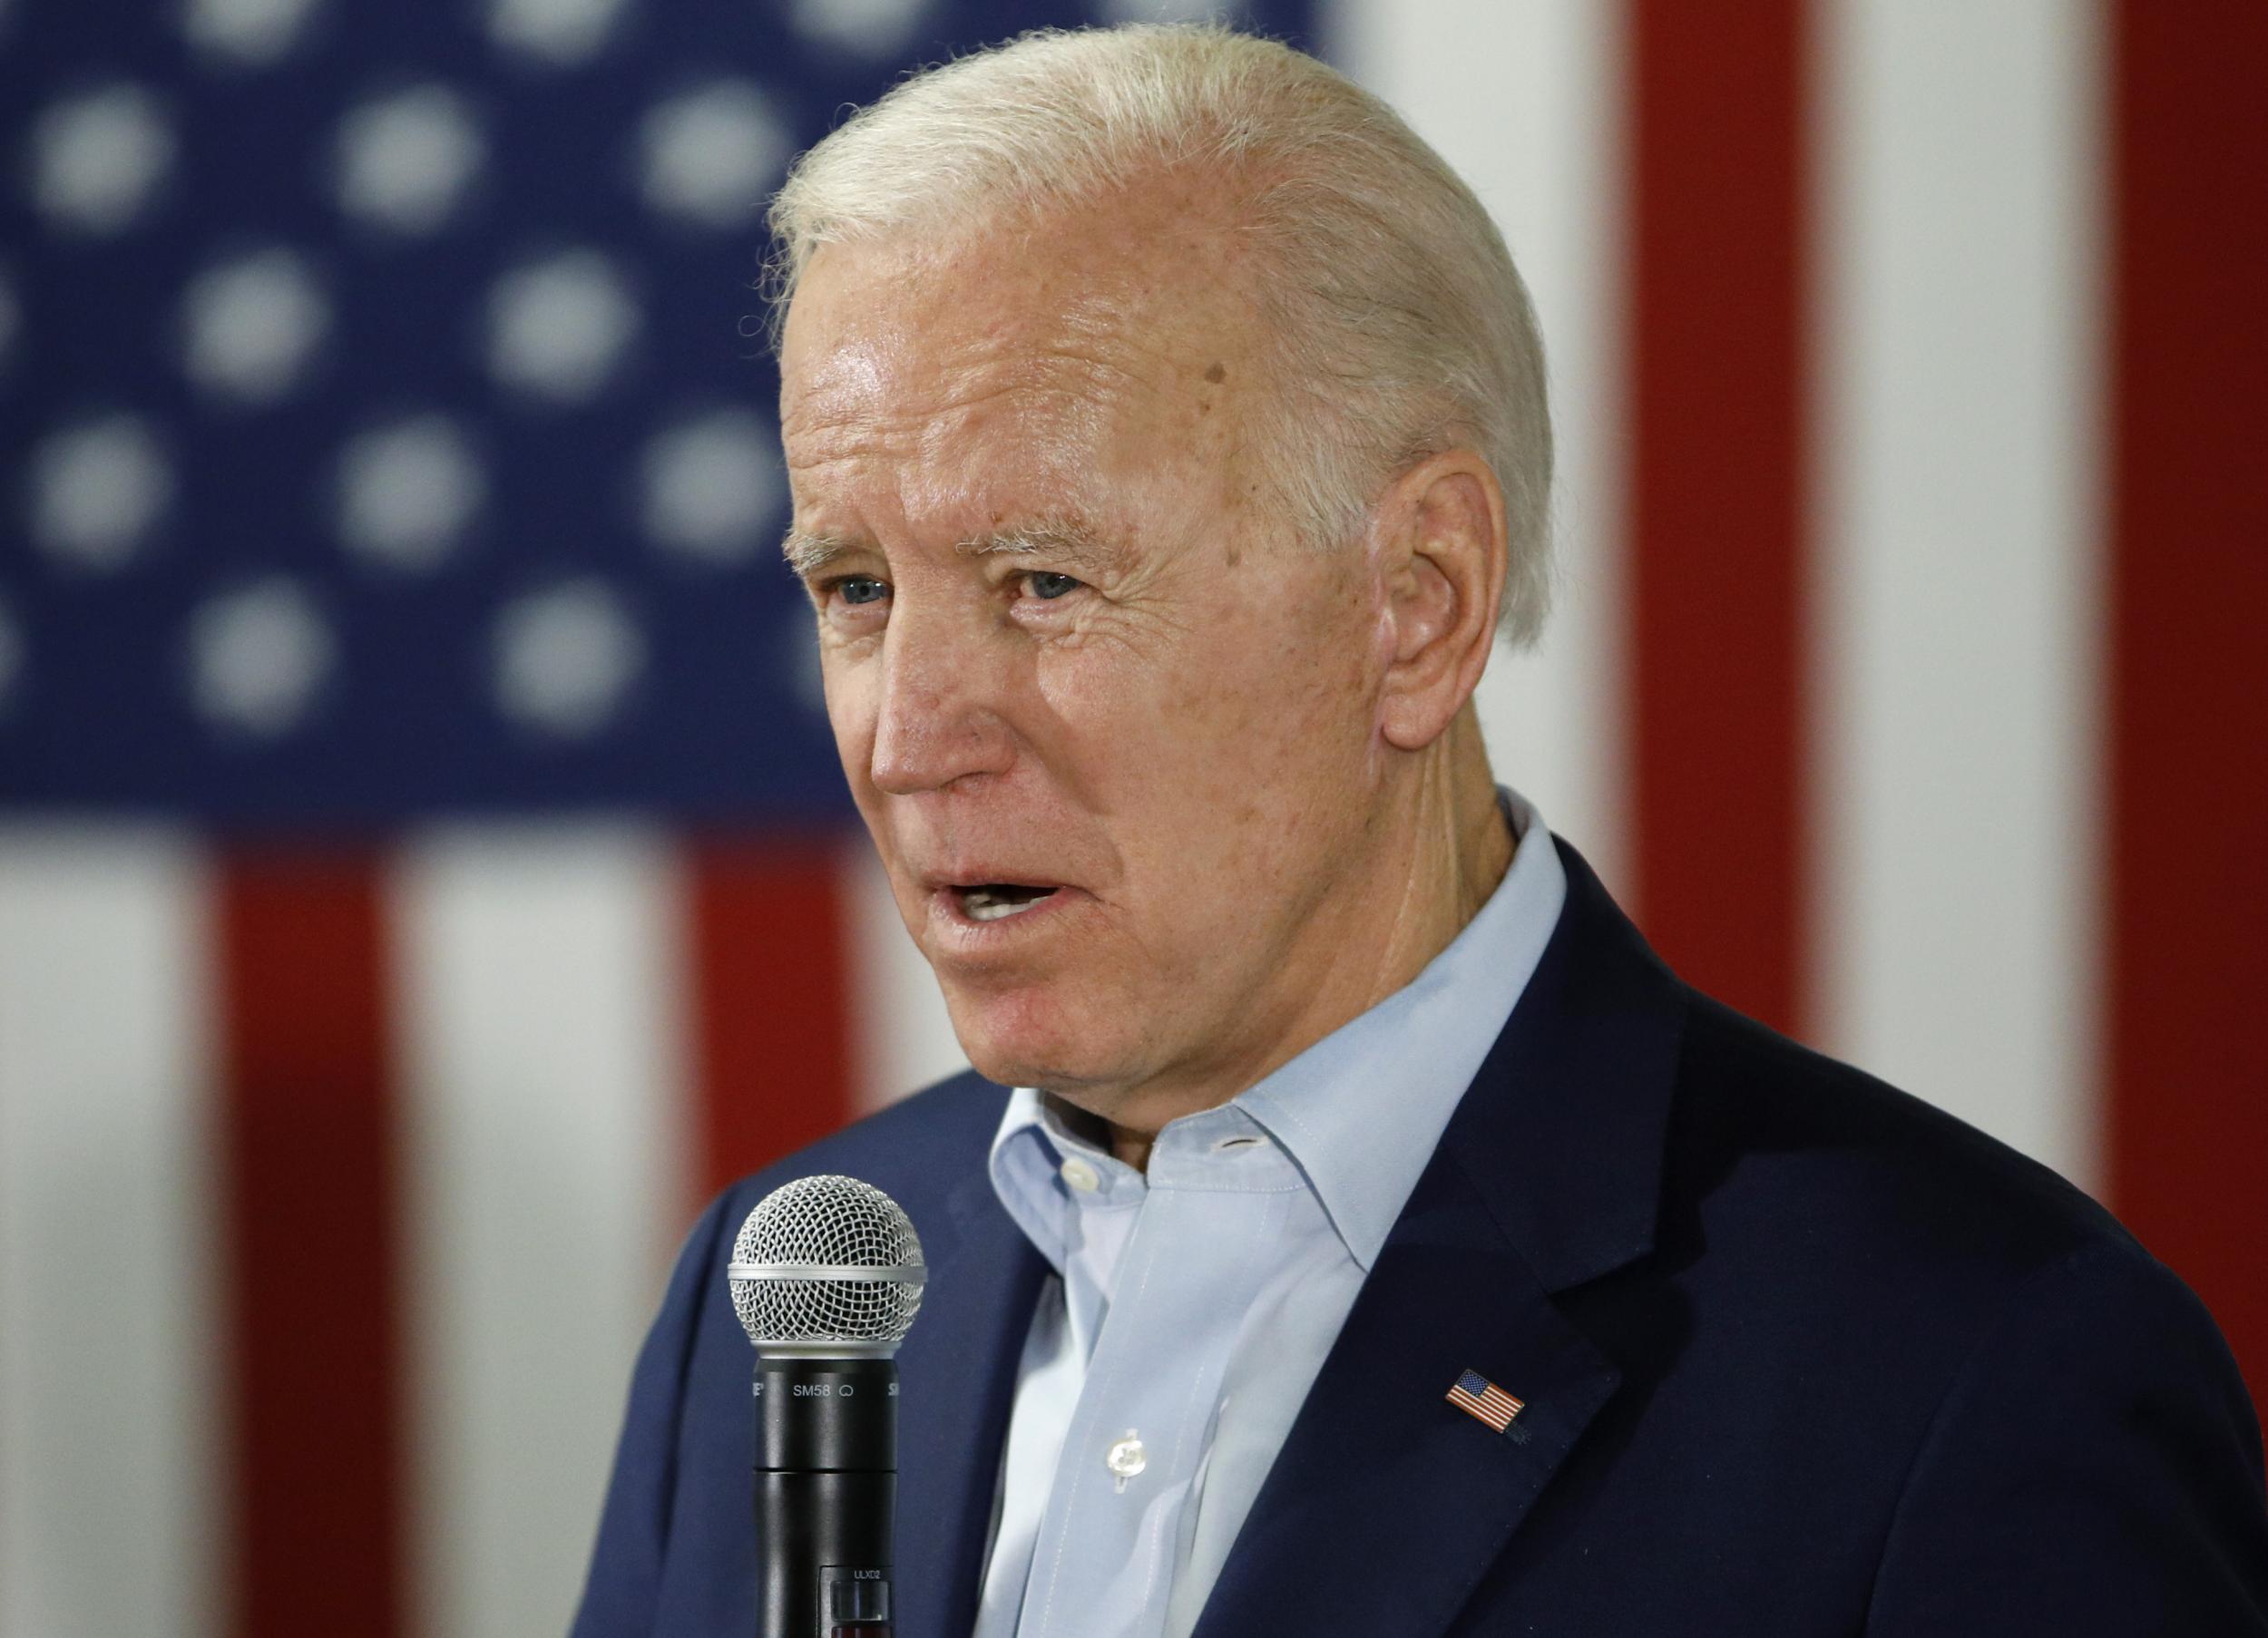 Joe Biden says he needs a VP who can 'take over immediately' if he dies in office: 'I'm an old guy'